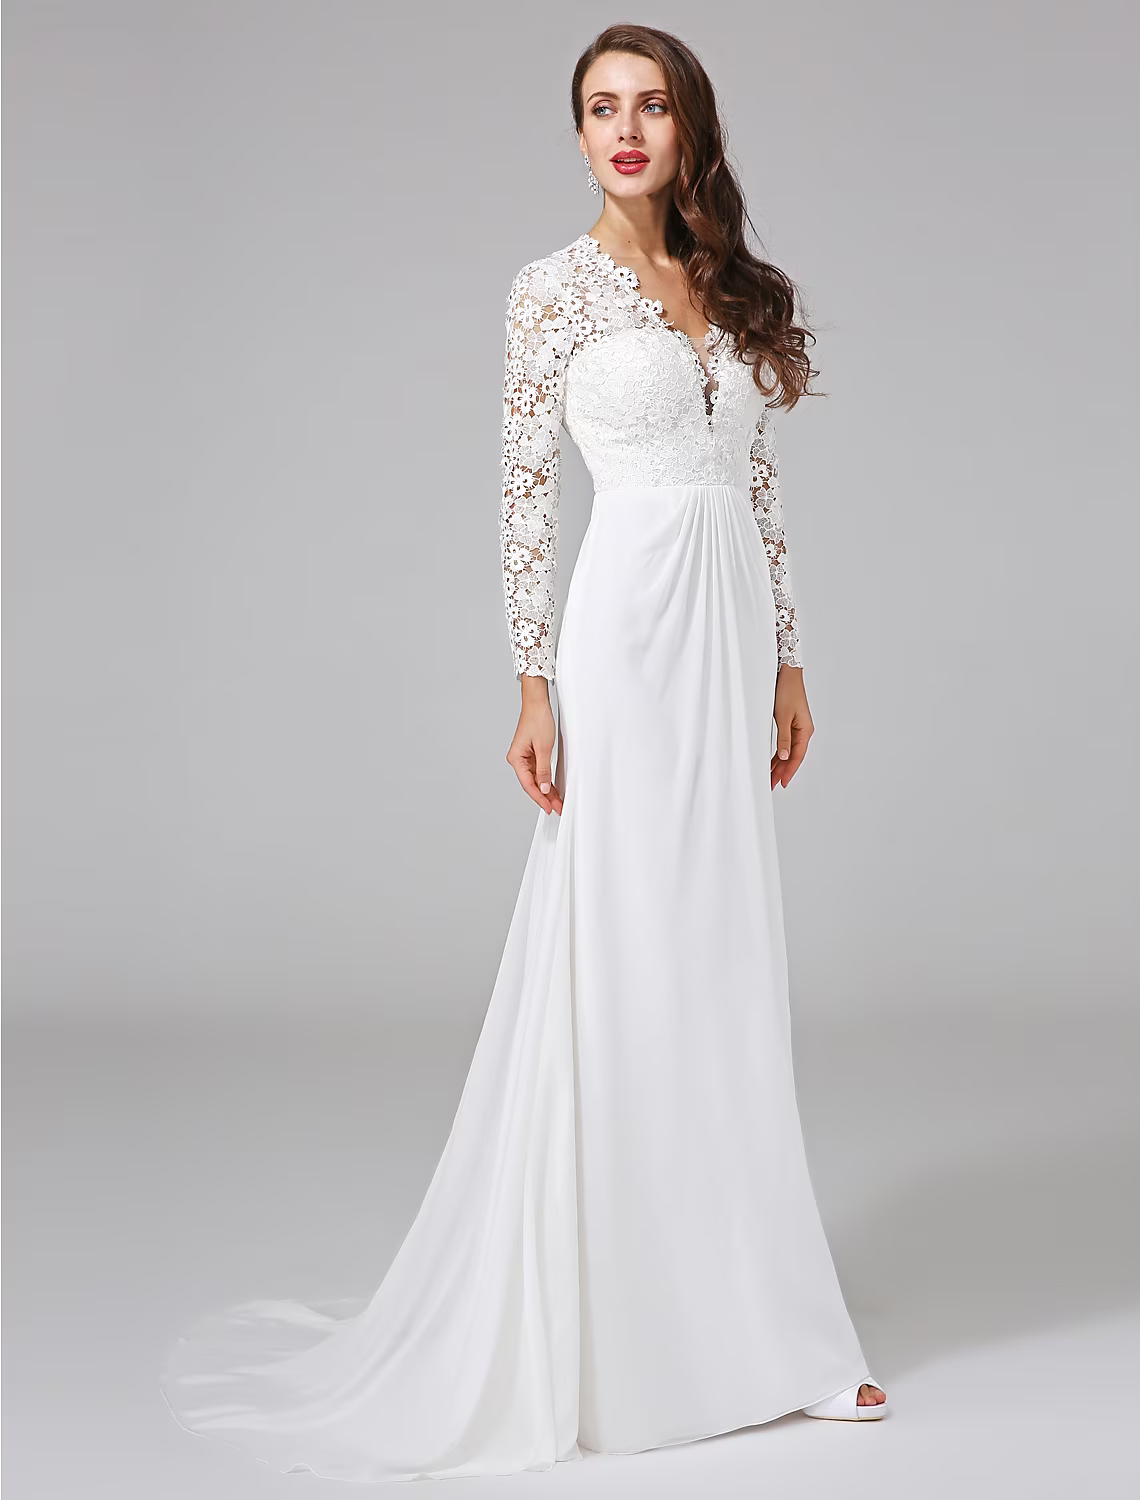 Beach Royal Style Wedding Dresses Long Sleeve V Neck Chiffon With Lace Button